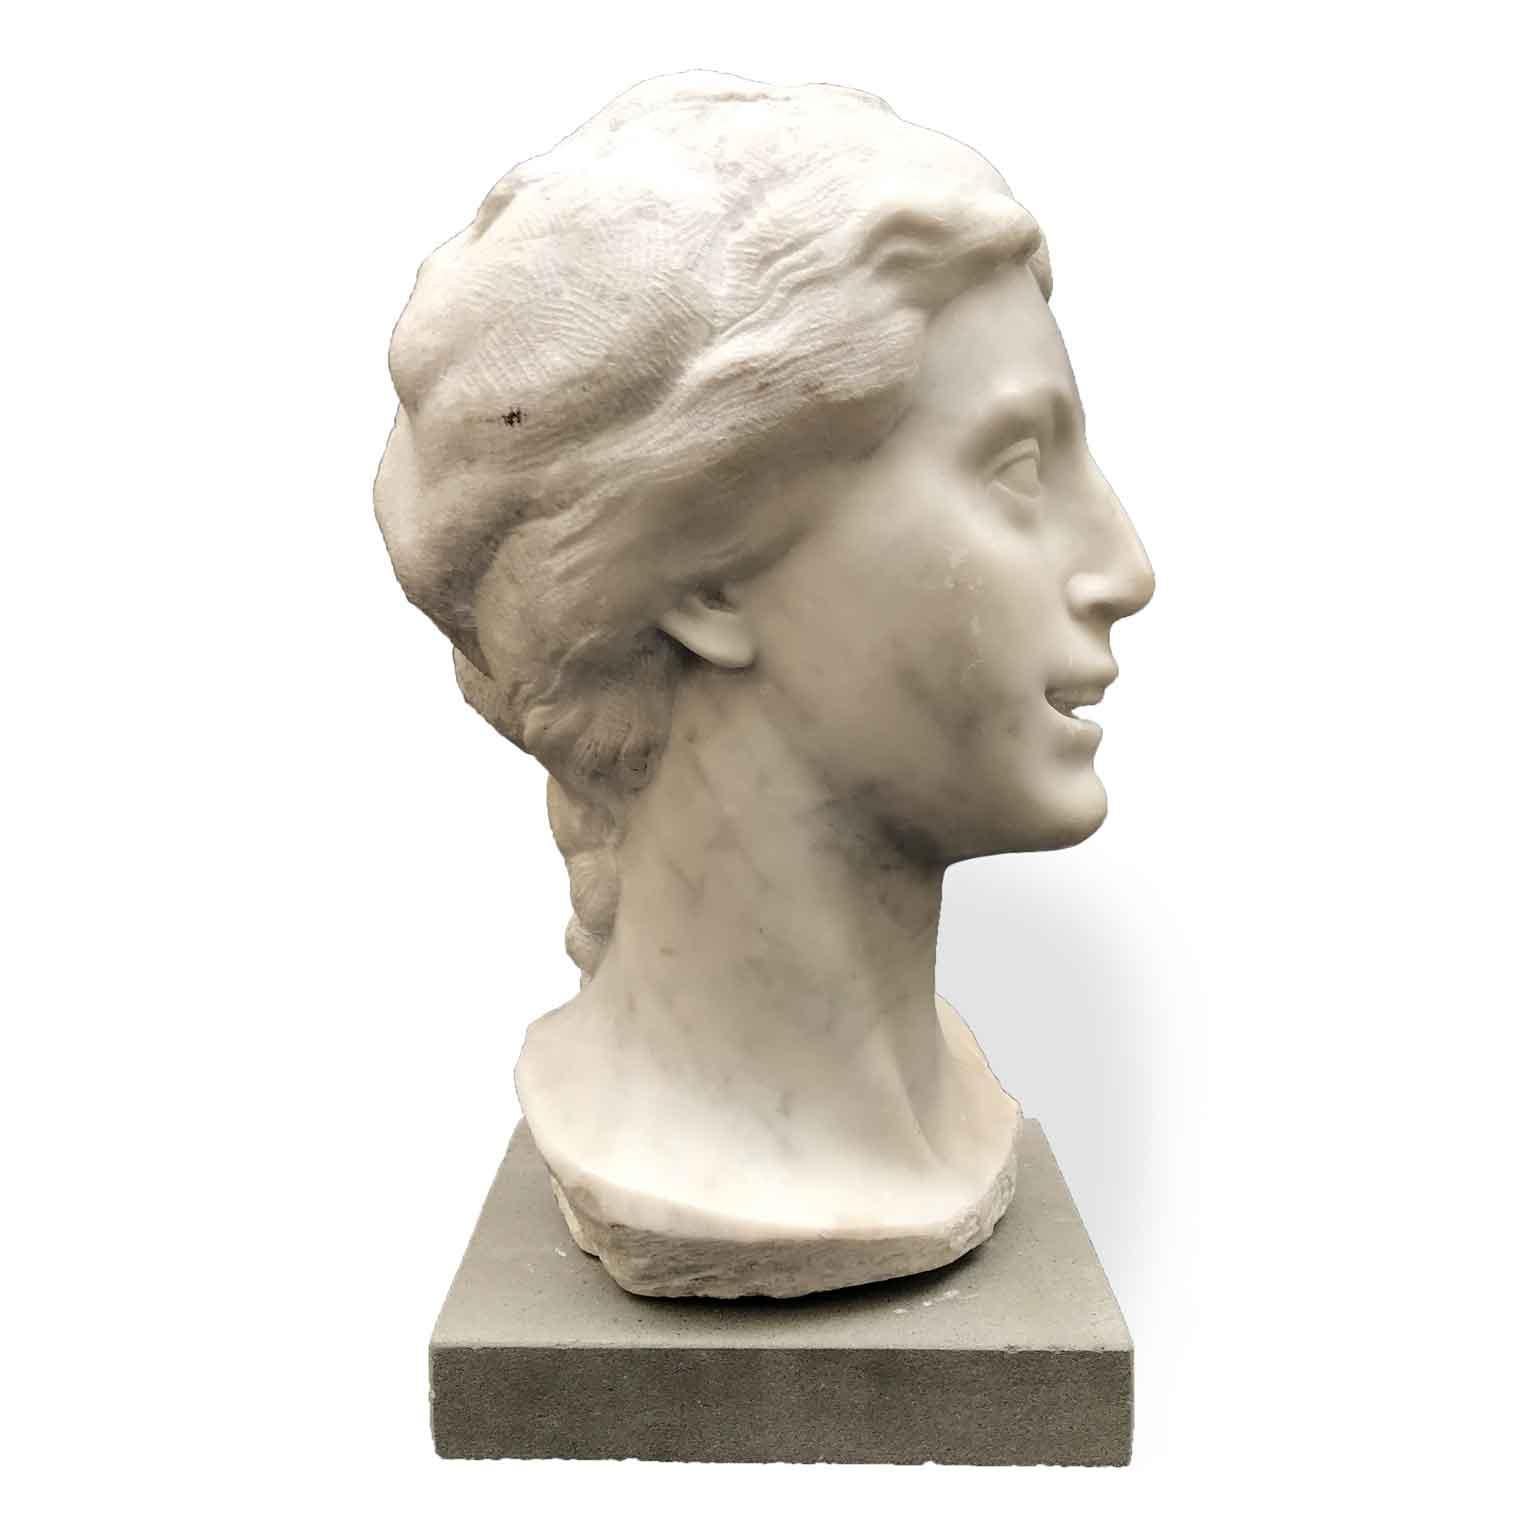 A 20th Century Italian white marble bust of a smiling girl, a carved Carrara marble figural sculpture, signed on the base by the Italian artist Aurelio Bossi, 1884-1948, whose sculptures are displayed at Pinacoteca di Brera in Milan, whereas at the